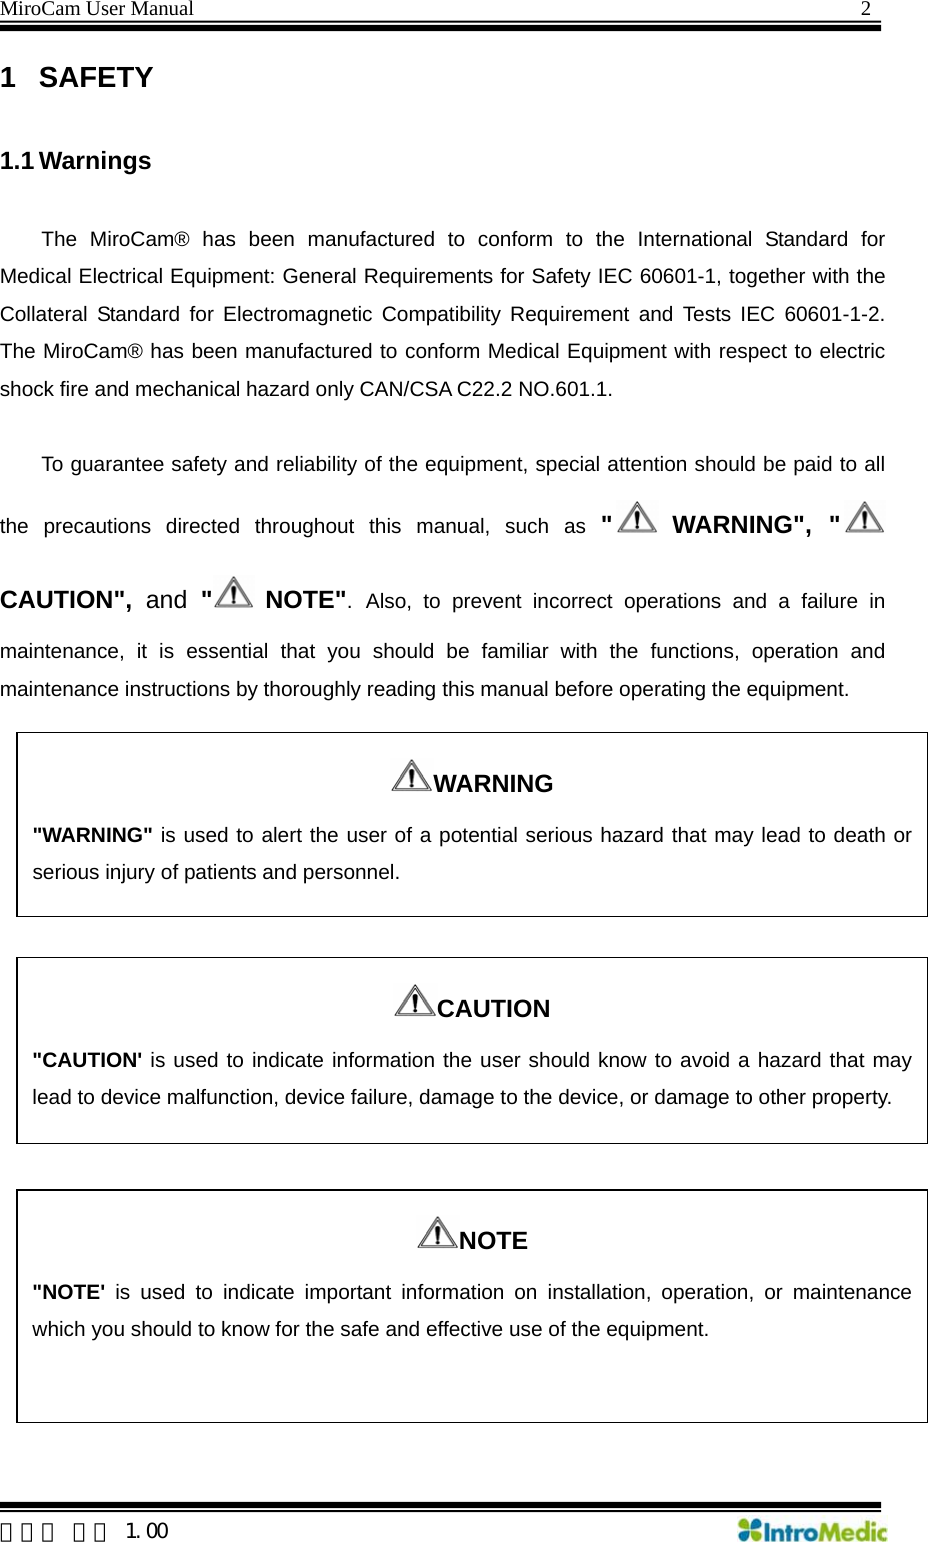 MiroCam User Manual                                                                2 1 SAFETY  1.1 Warnings  The MiroCam® has been manufactured to conform to the International Standard for Medical Electrical Equipment: General Requirements for Safety IEC 60601-1, together with the Collateral Standard for Electromagnetic Compatibility Requirement and Tests IEC 60601-1-2. The MiroCam® has been manufactured to conform Medical Equipment with respect to electric shock fire and mechanical hazard only CAN/CSA C22.2 NO.601.1.  To guarantee safety and reliability of the equipment, special attention should be paid to all the precautions directed throughout this manual, such as &quot; WARNING&quot;, &quot; CAUTION&quot;, and &quot; NOTE&quot;. Also, to prevent incorrect operations and a failure in maintenance, it is essential that you should be familiar with the functions, operation and maintenance instructions by thoroughly reading this manual before operating the equipment.  WARNING &quot;WARNING&quot; is used to alert the user of a potential serious hazard that may lead to death or serious injury of patients and personnel.   CAUTION &quot;CAUTION&apos; is used to indicate information the user should know to avoid a hazard that may lead to device malfunction, device failure, damage to the device, or damage to other property. NOTE &quot;NOTE&apos; is used to indicate important information on installation, operation, or maintenance which you should to know for the safe and effective use of the equipment.  한글판 버전 1.00 